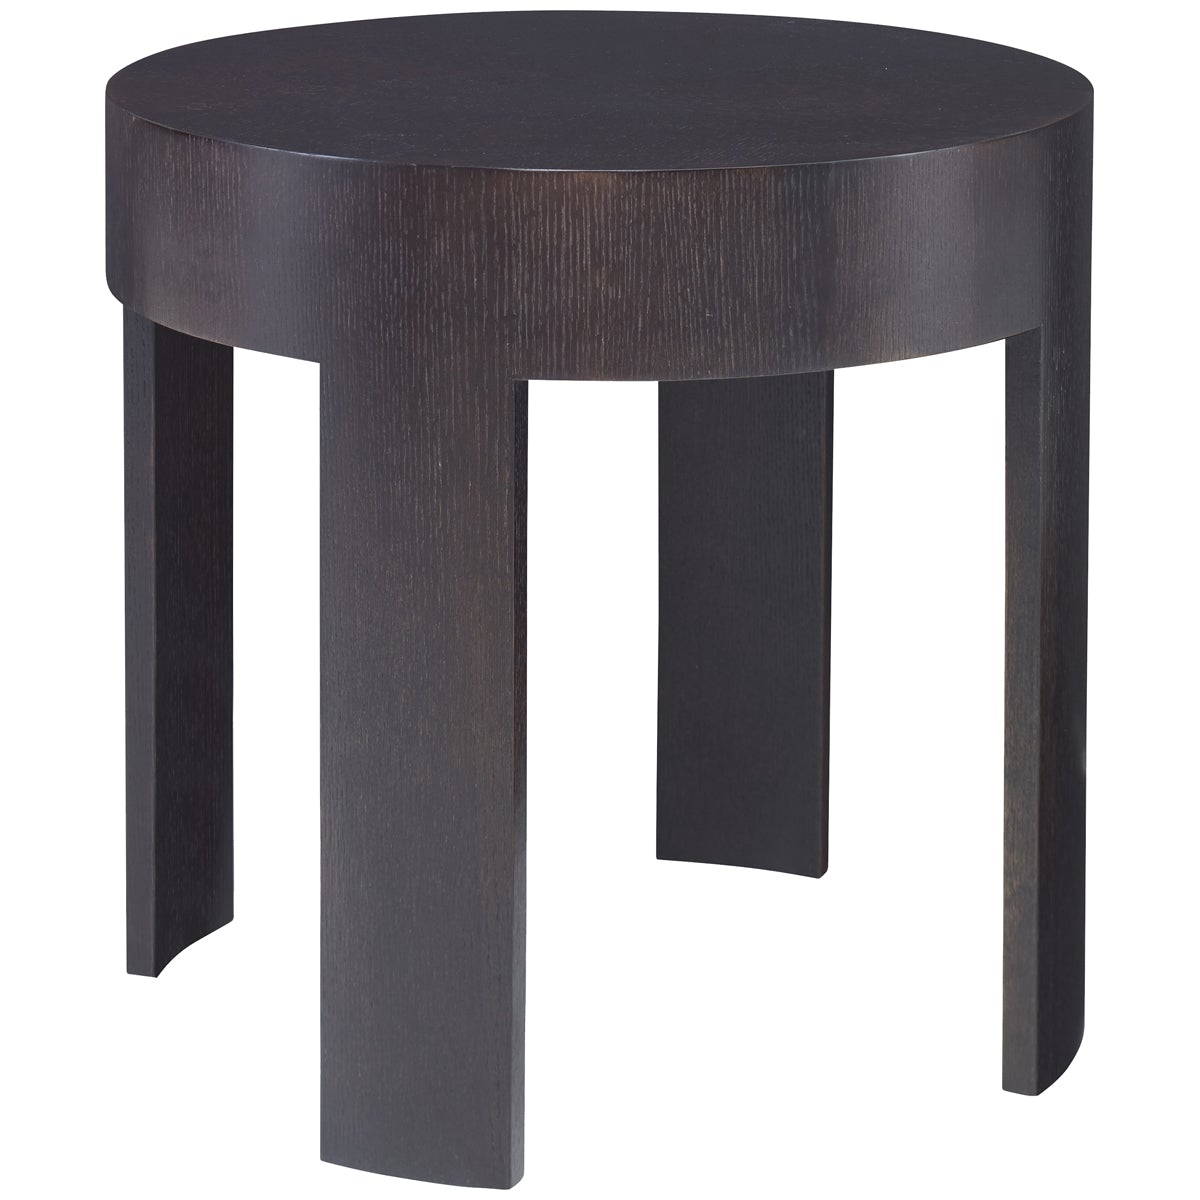 Ambella Home Easton Round End Table